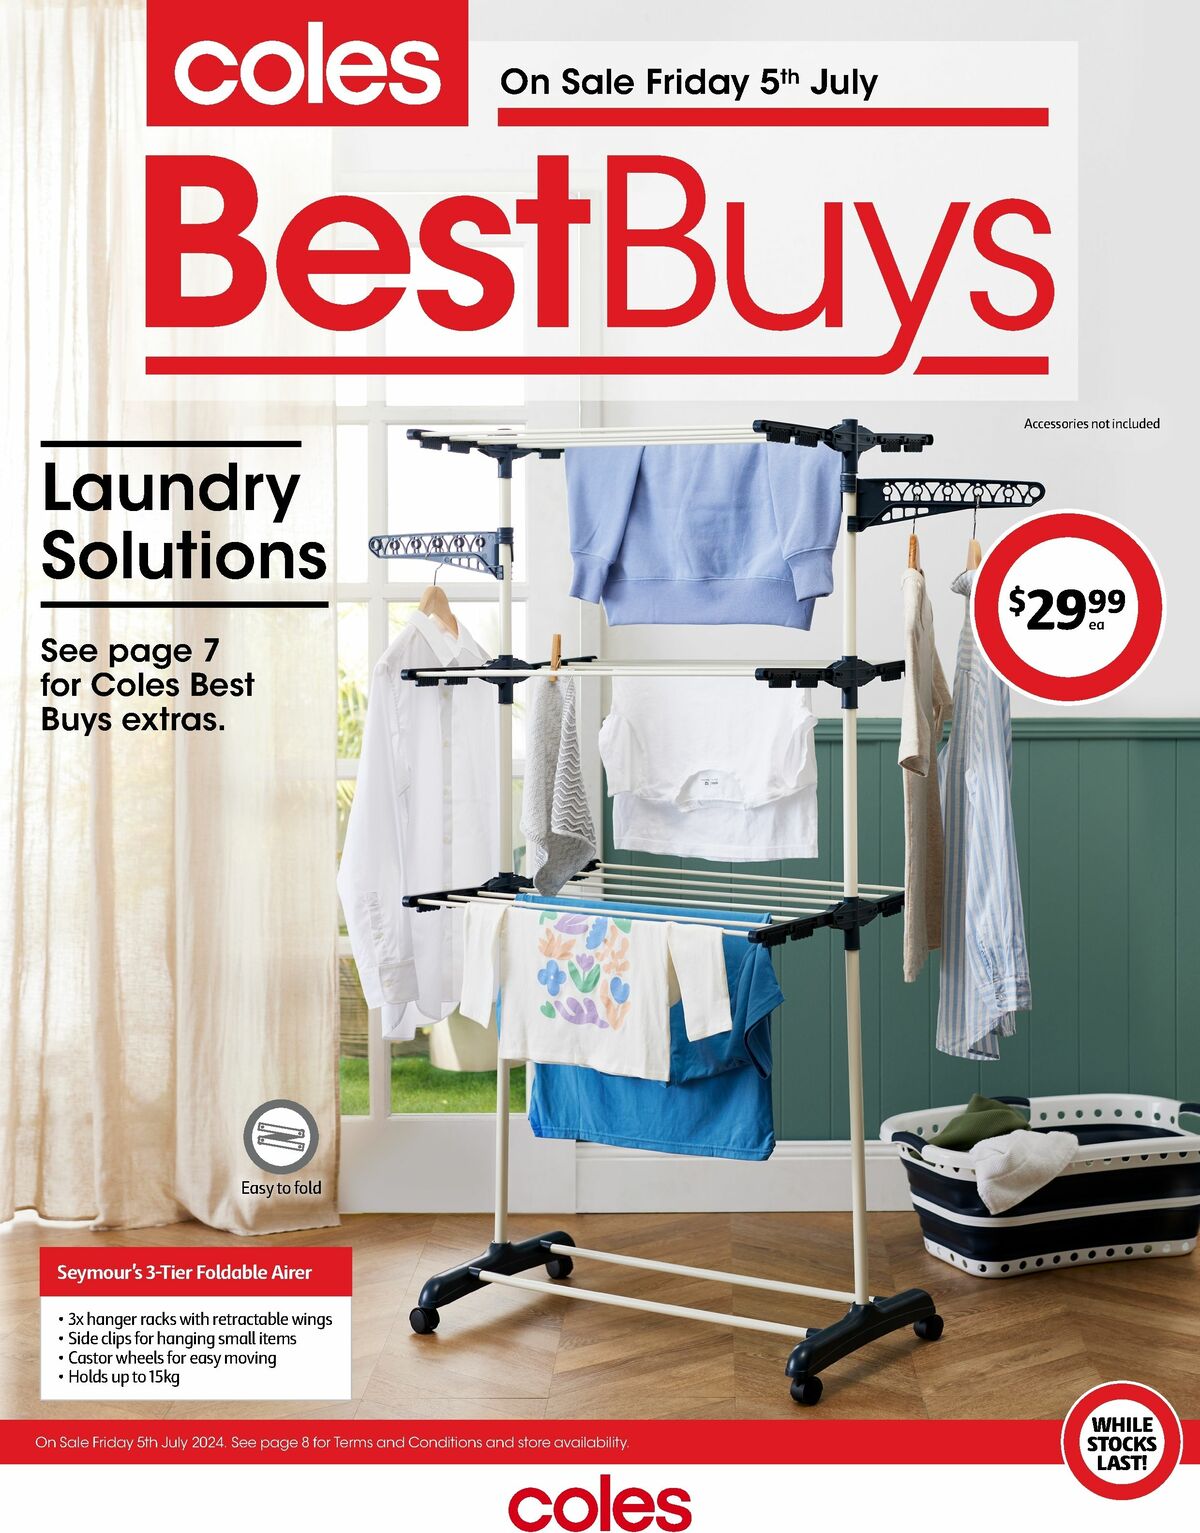 Coles Best Buys - Laundry Solutions Catalogues from 5 July